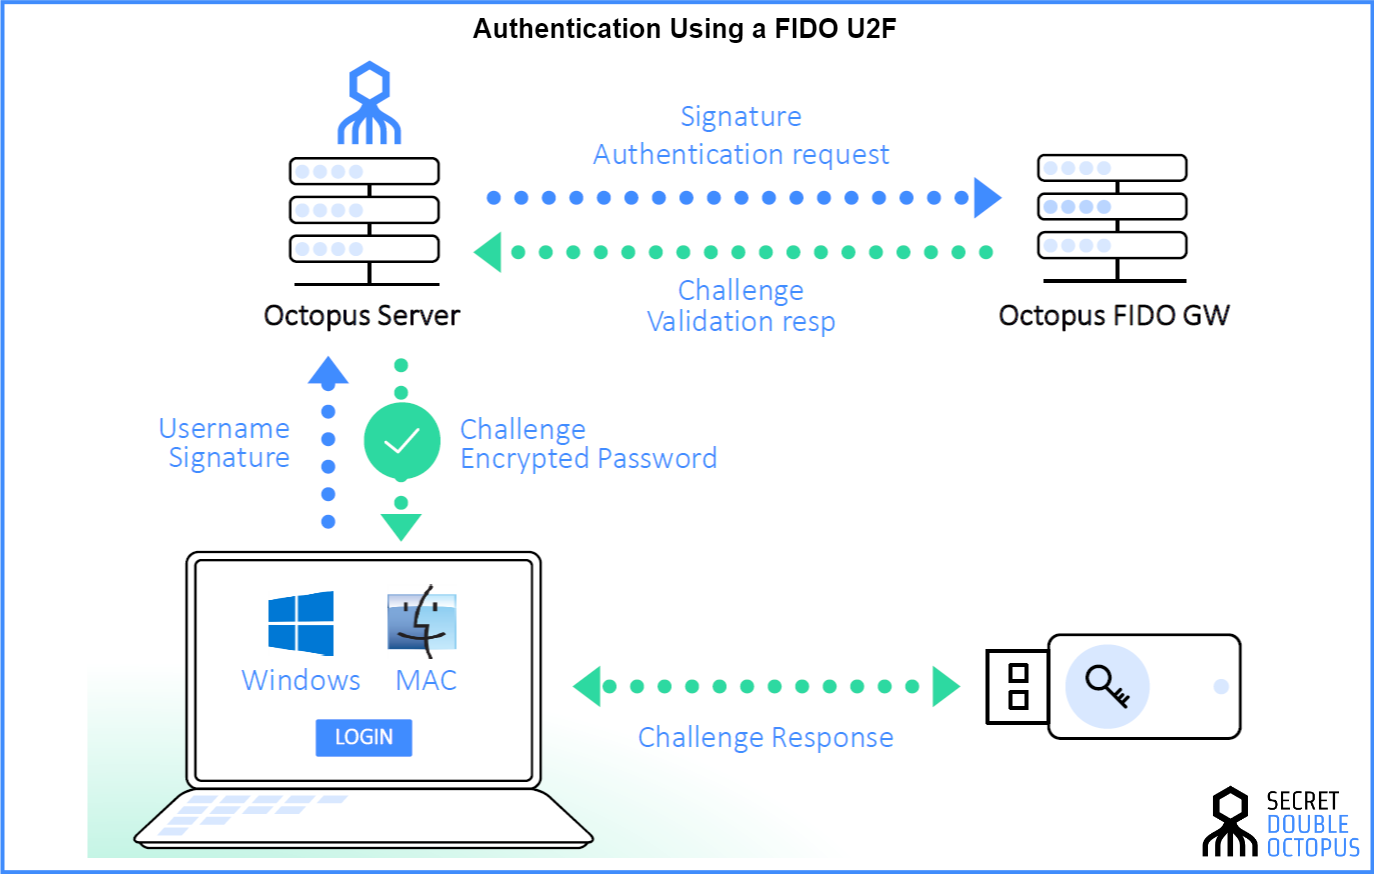 TOTP device mfa authentication server